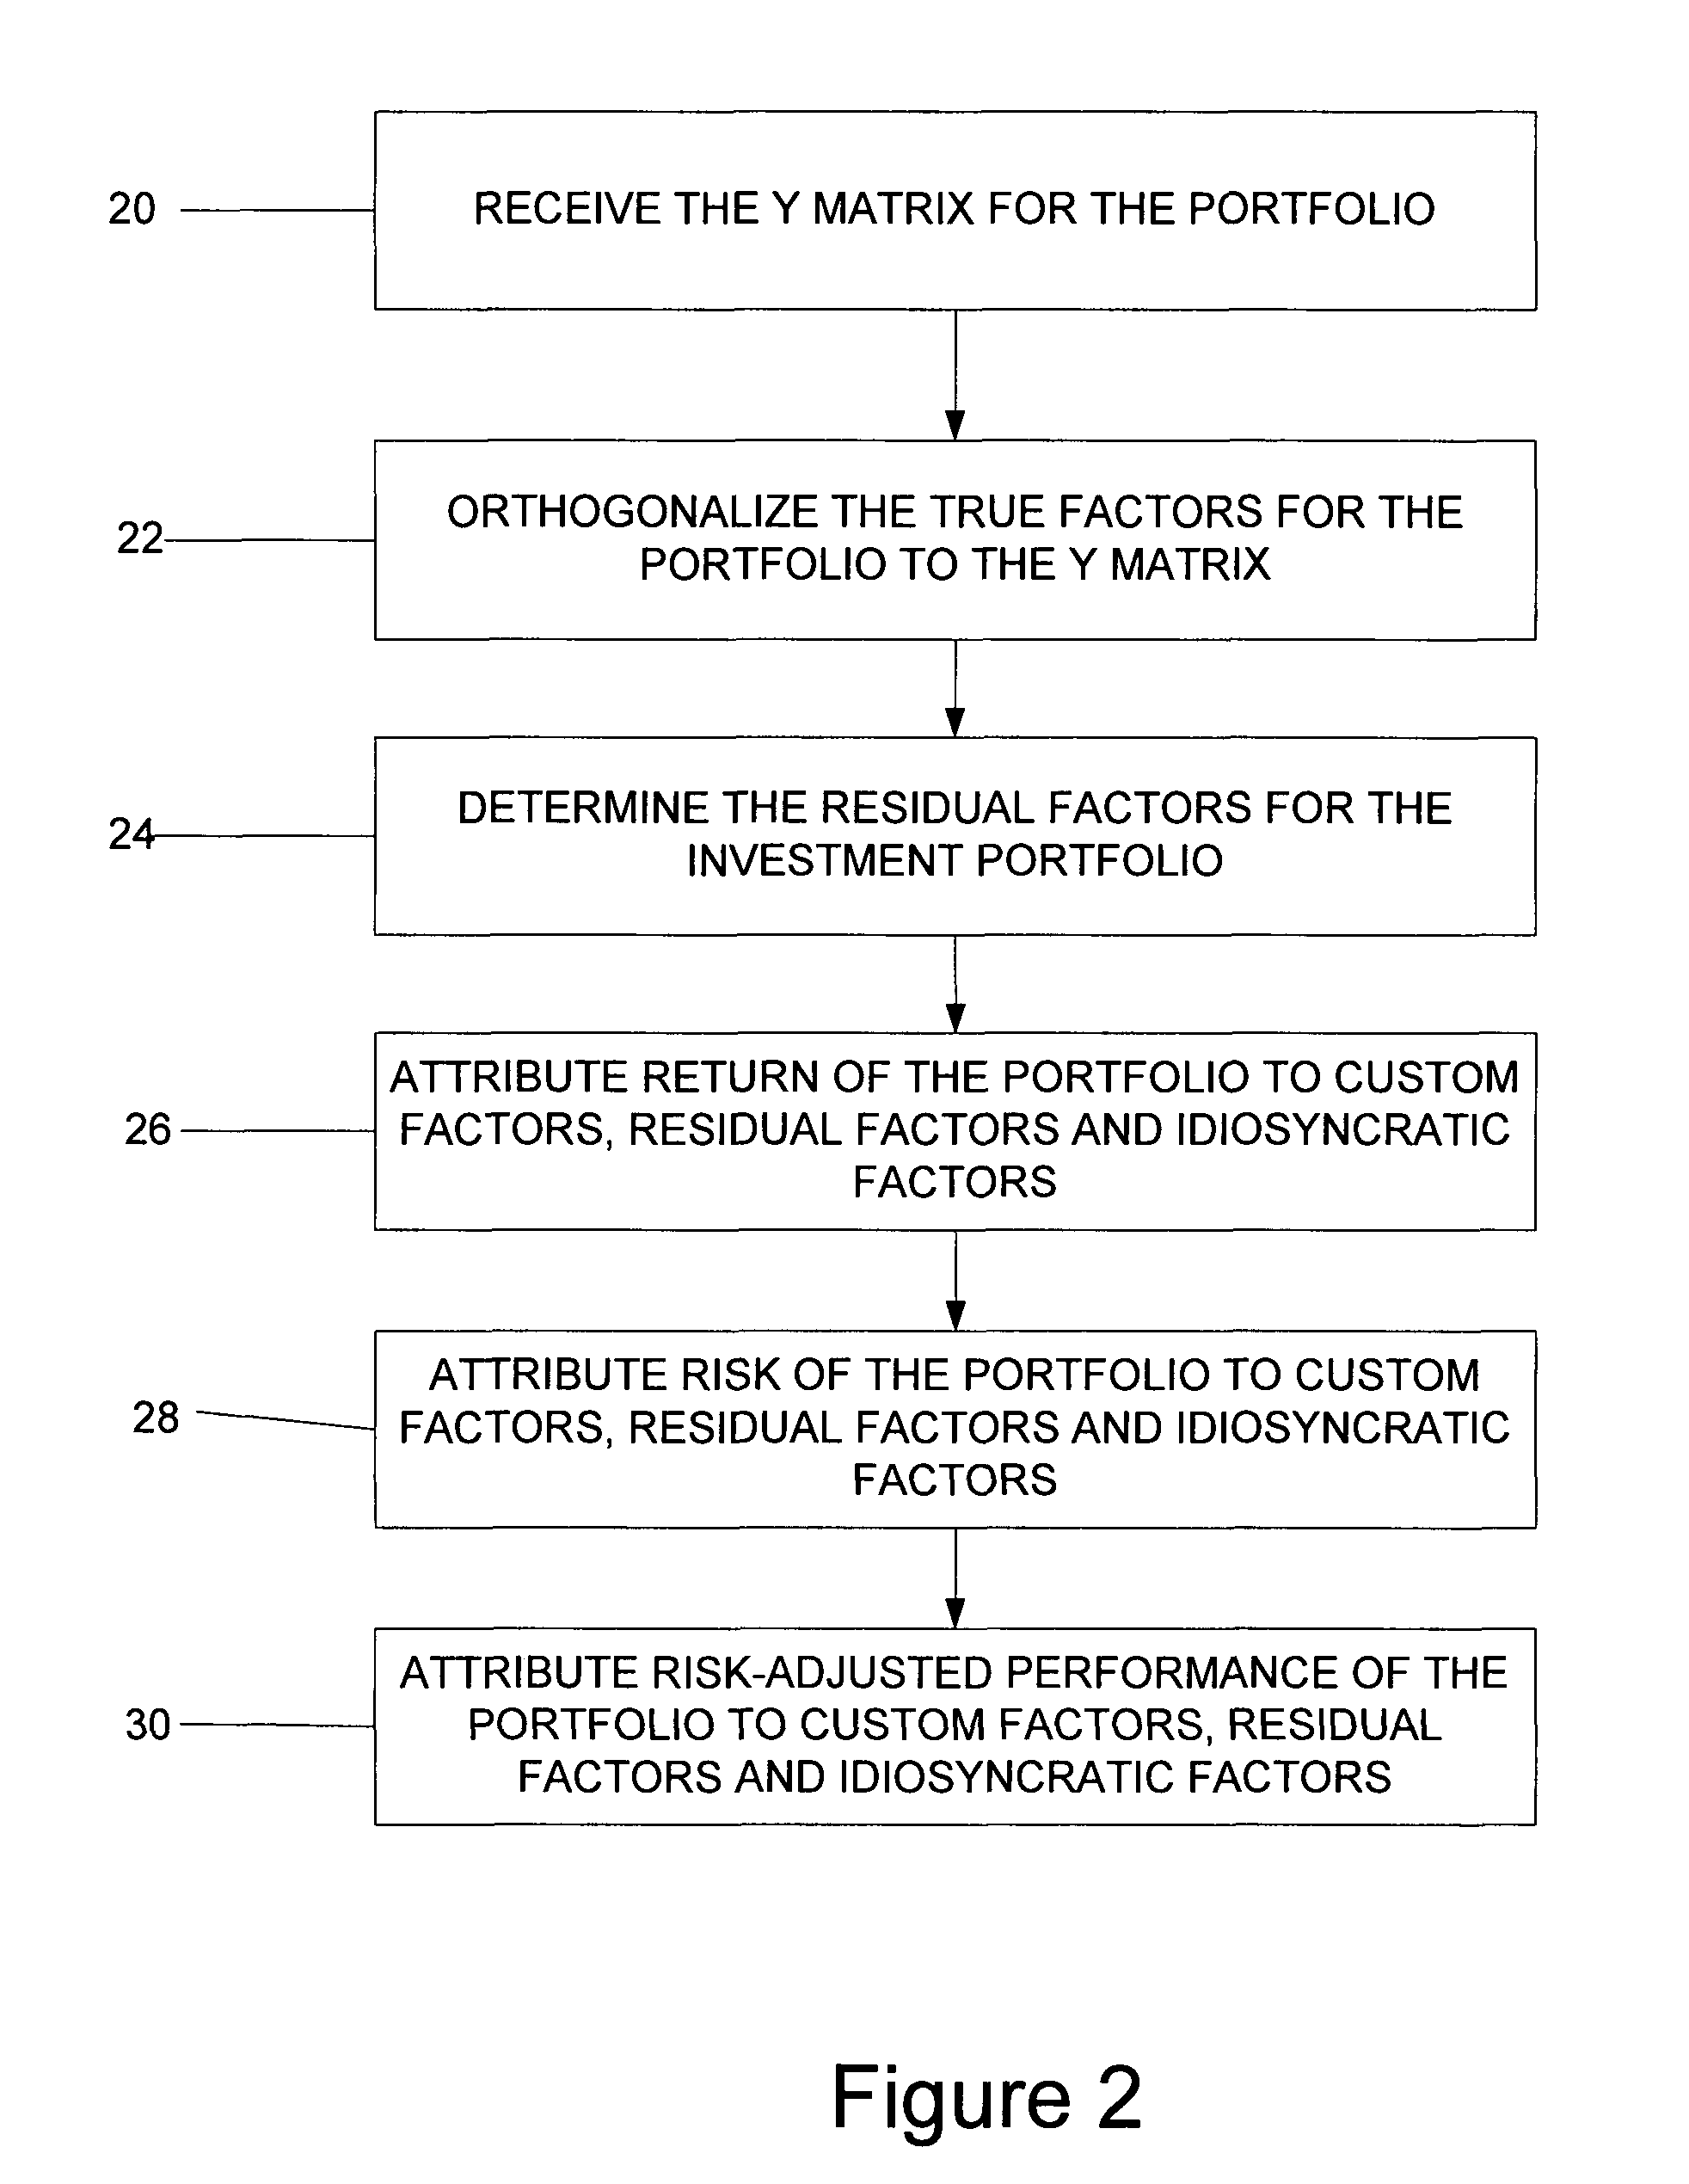 System and method for attributing performance, risk and risk-adjusted performance of an investment portfolio to custom factors